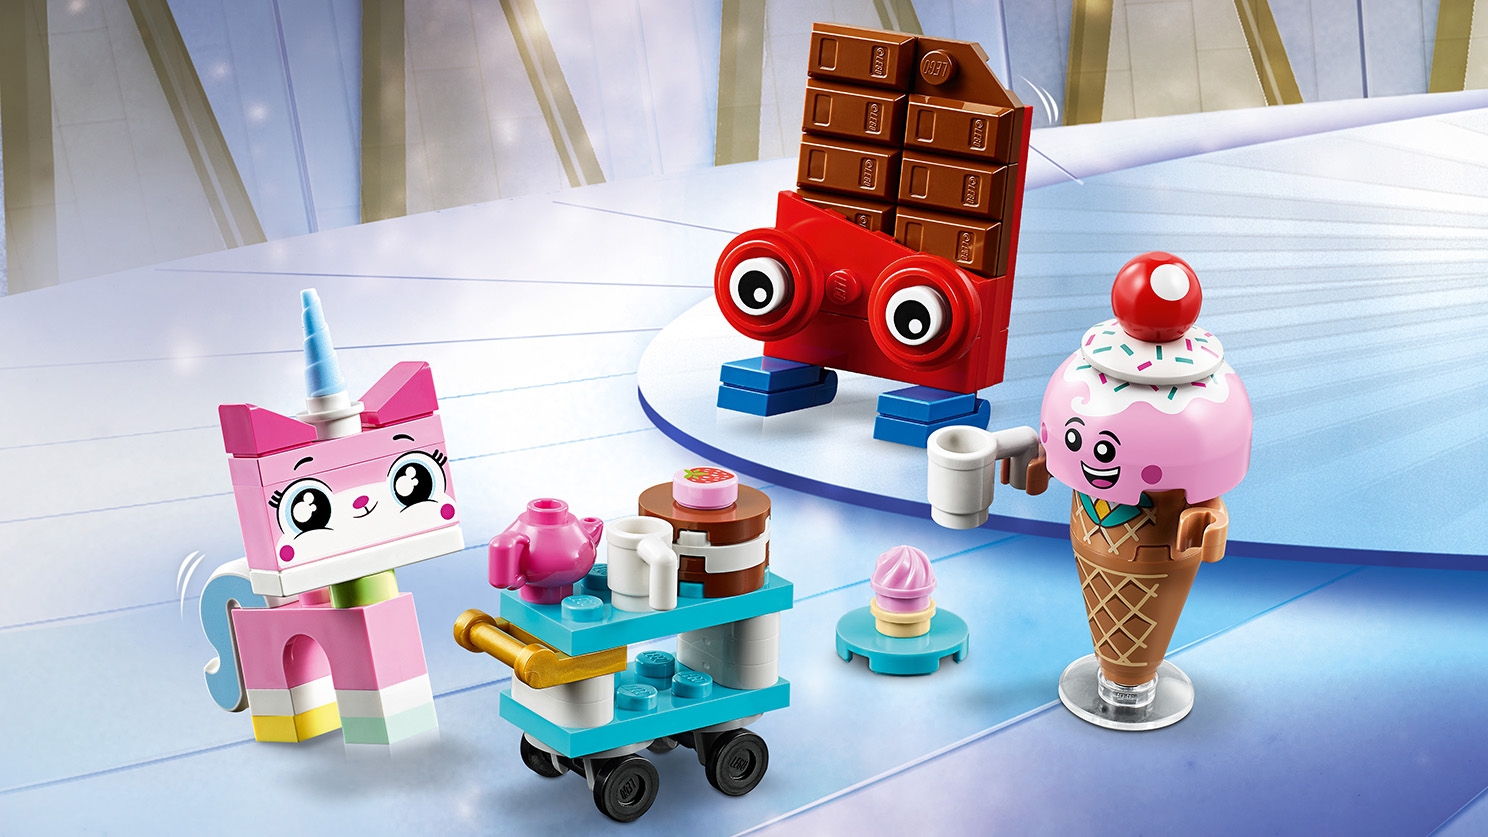 Unikitty's Sweetest EVER! 70822 - THE MOVIE 2™ Sets - LEGO.com for kids